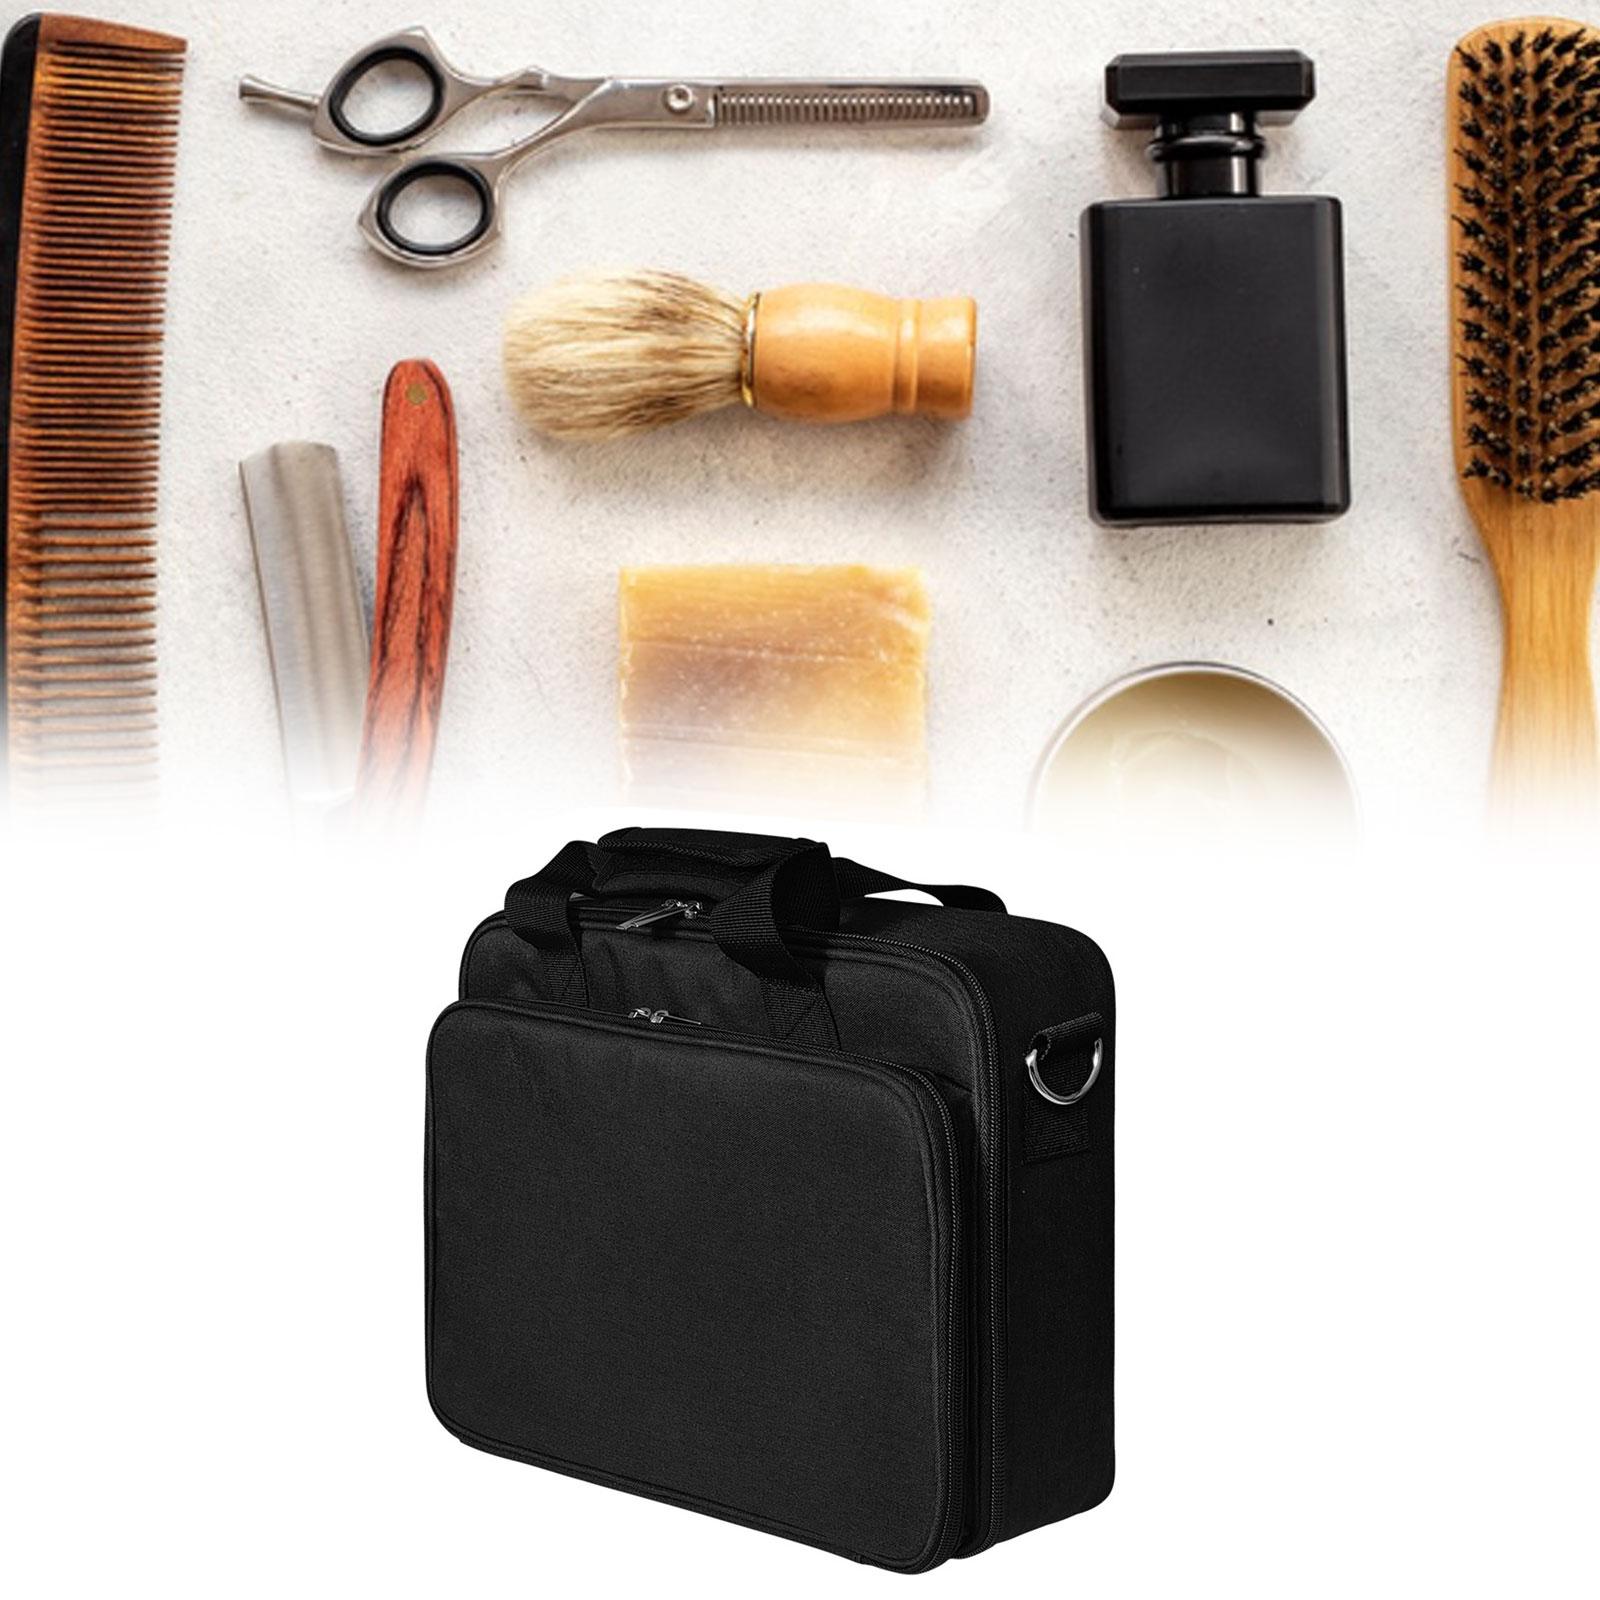 Hairdressing Bag Hair Bag for Makeup Tool Hairbrushes Combs Grooming